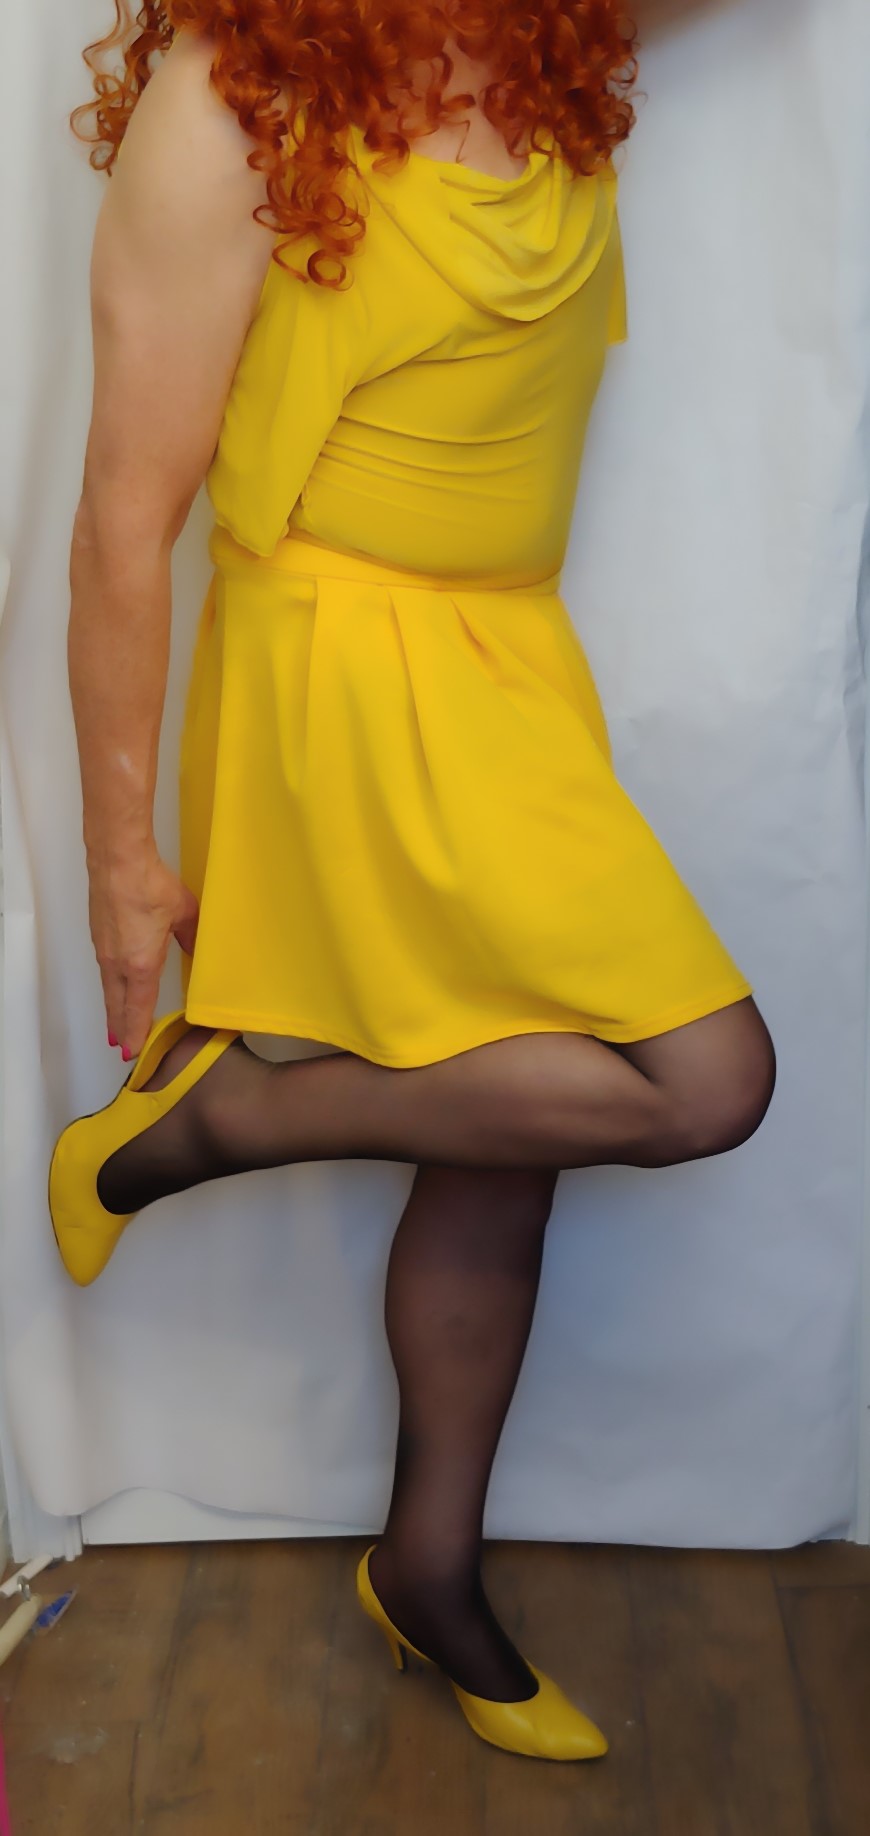 Sissy in yellow